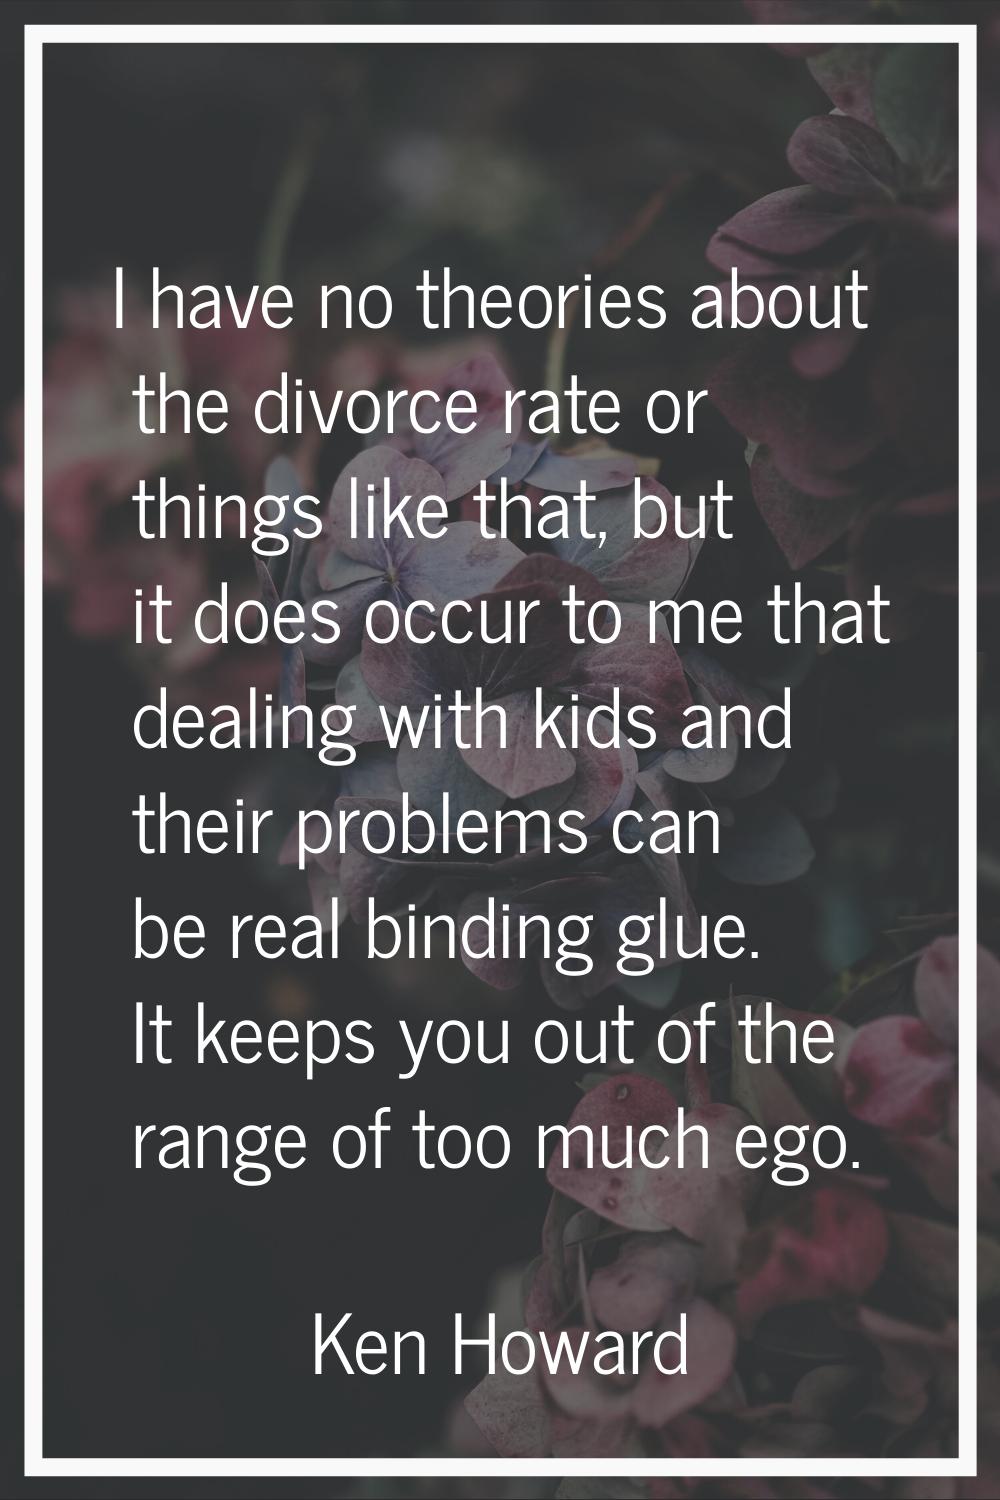 I have no theories about the divorce rate or things like that, but it does occur to me that dealing